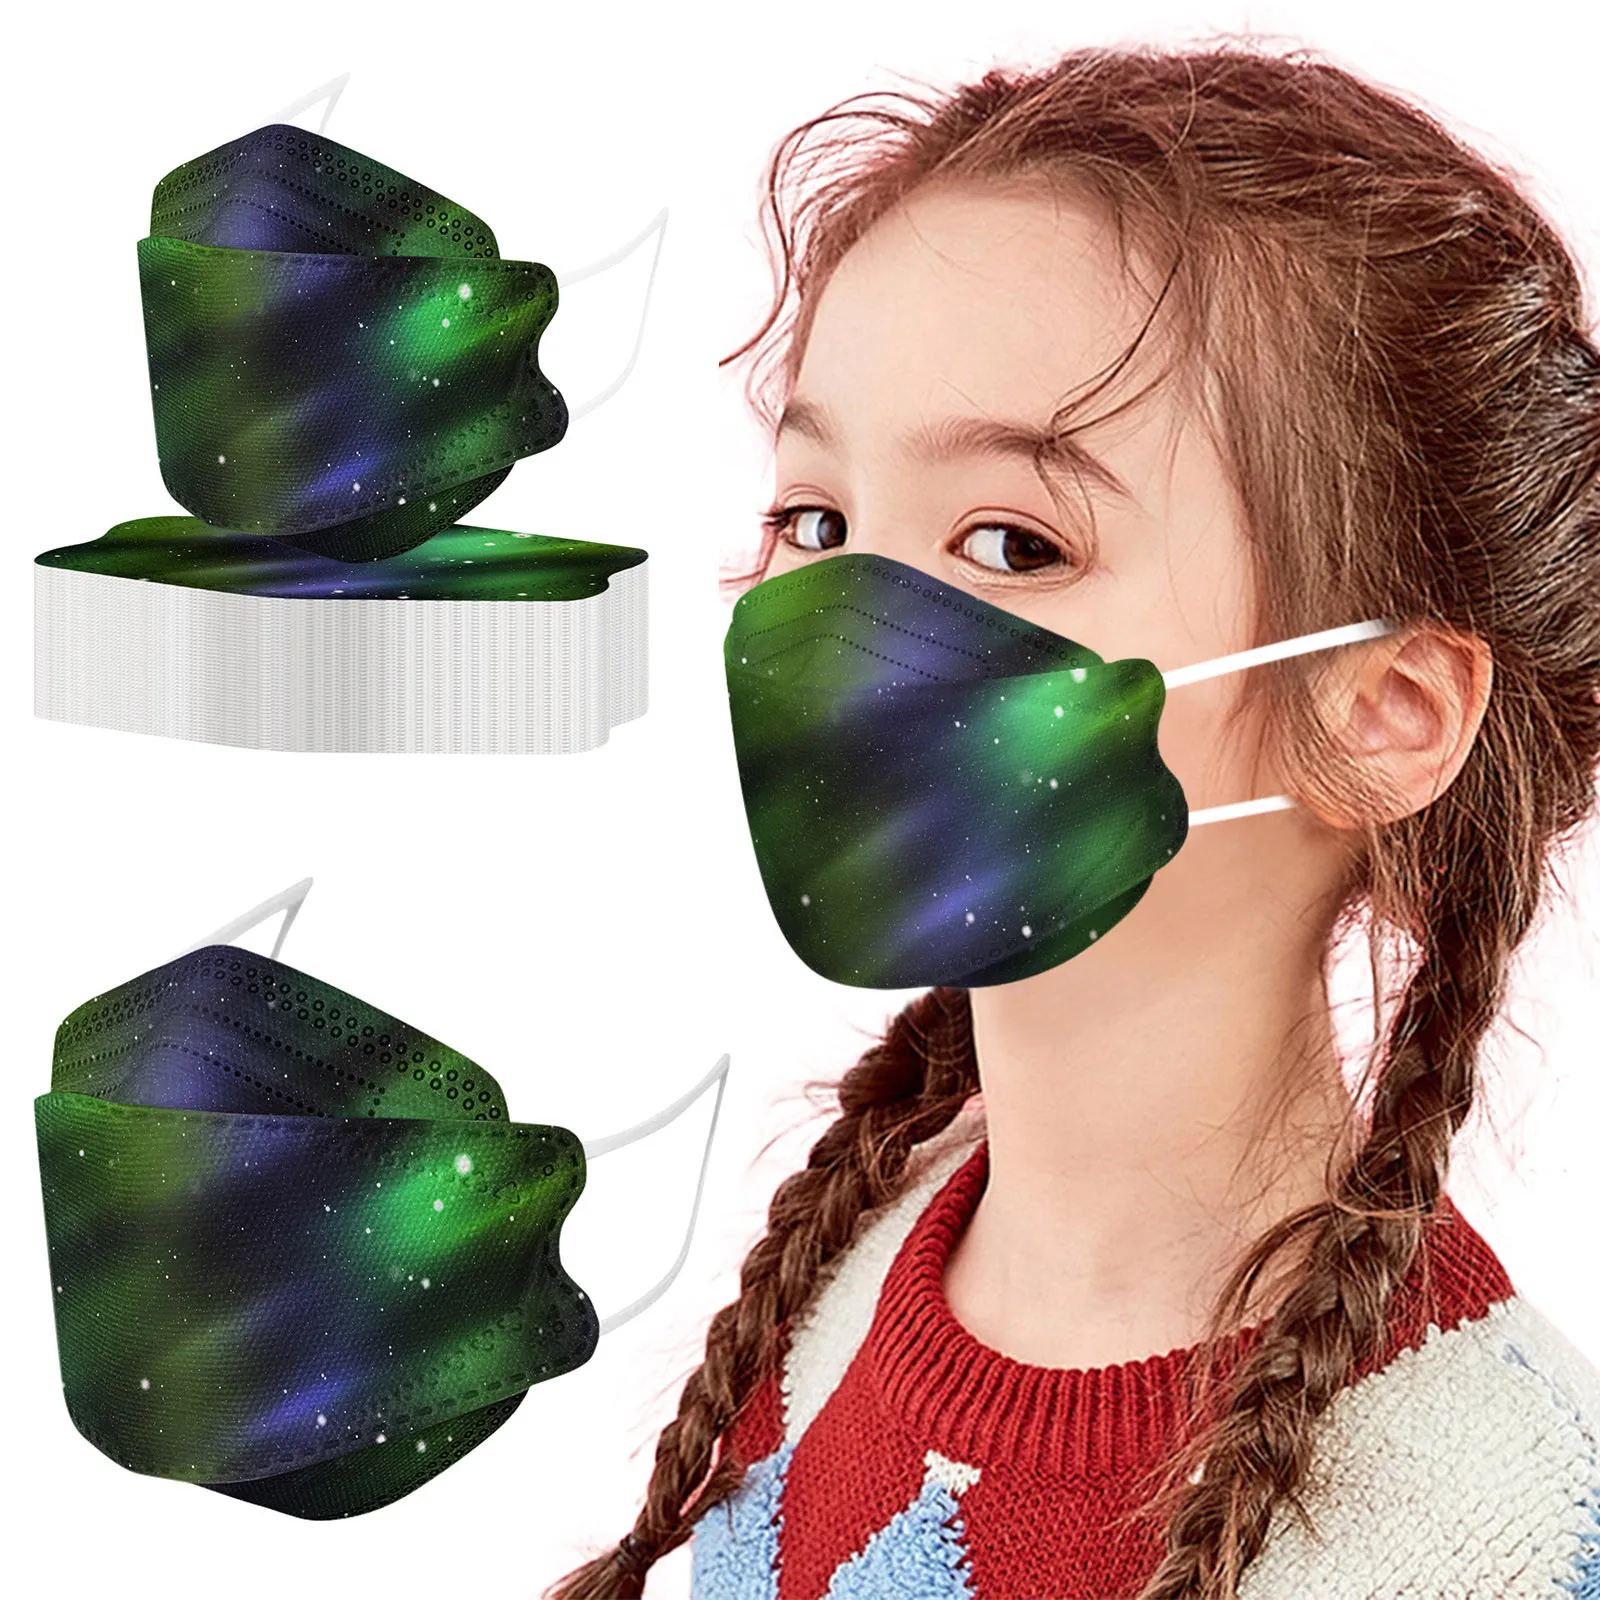 

Starry Sky Print Child Mask Outdoor 3D Fish Disposable Girls Boys Mask Fashion Non Woven Breathable Kids Facemask Masque Mascari